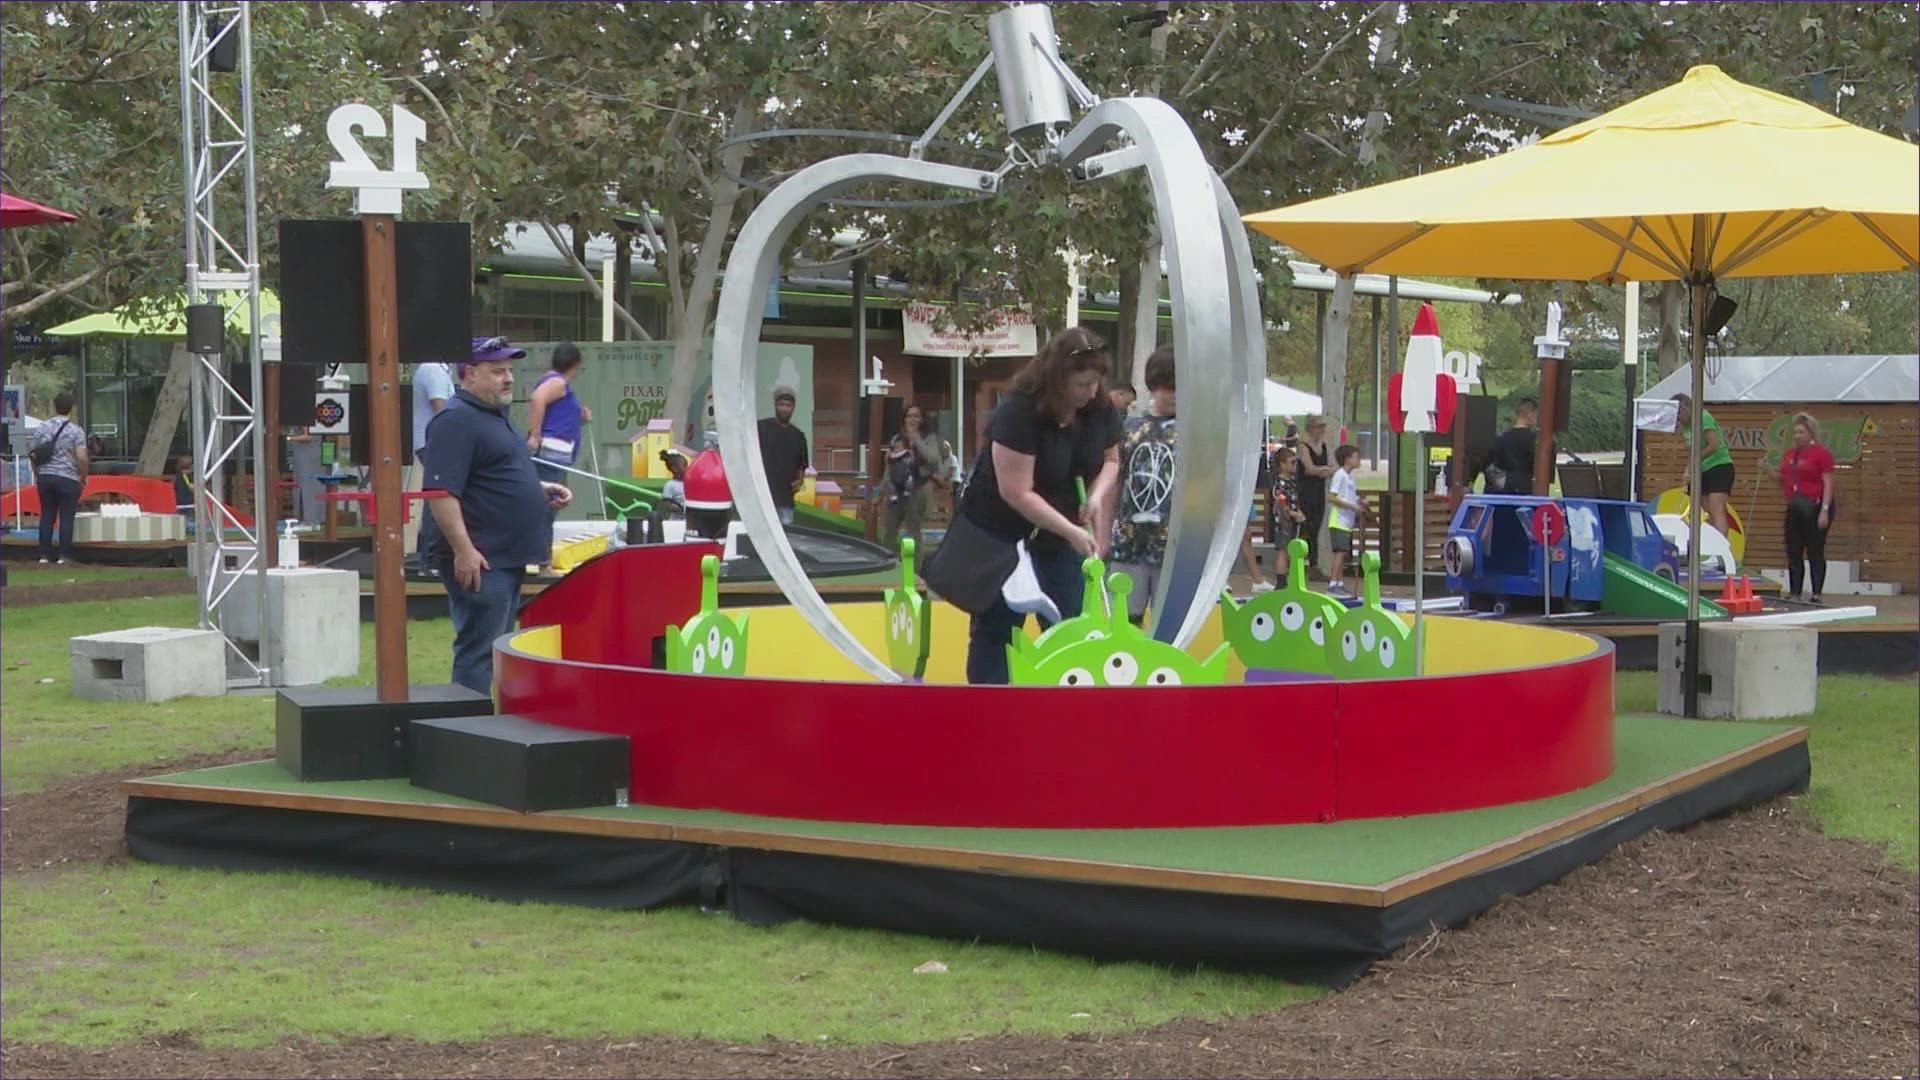 PIXAR PUTT is available at Discovery Green until March 20, 2022. Tickets are available online only at pixarputt.com